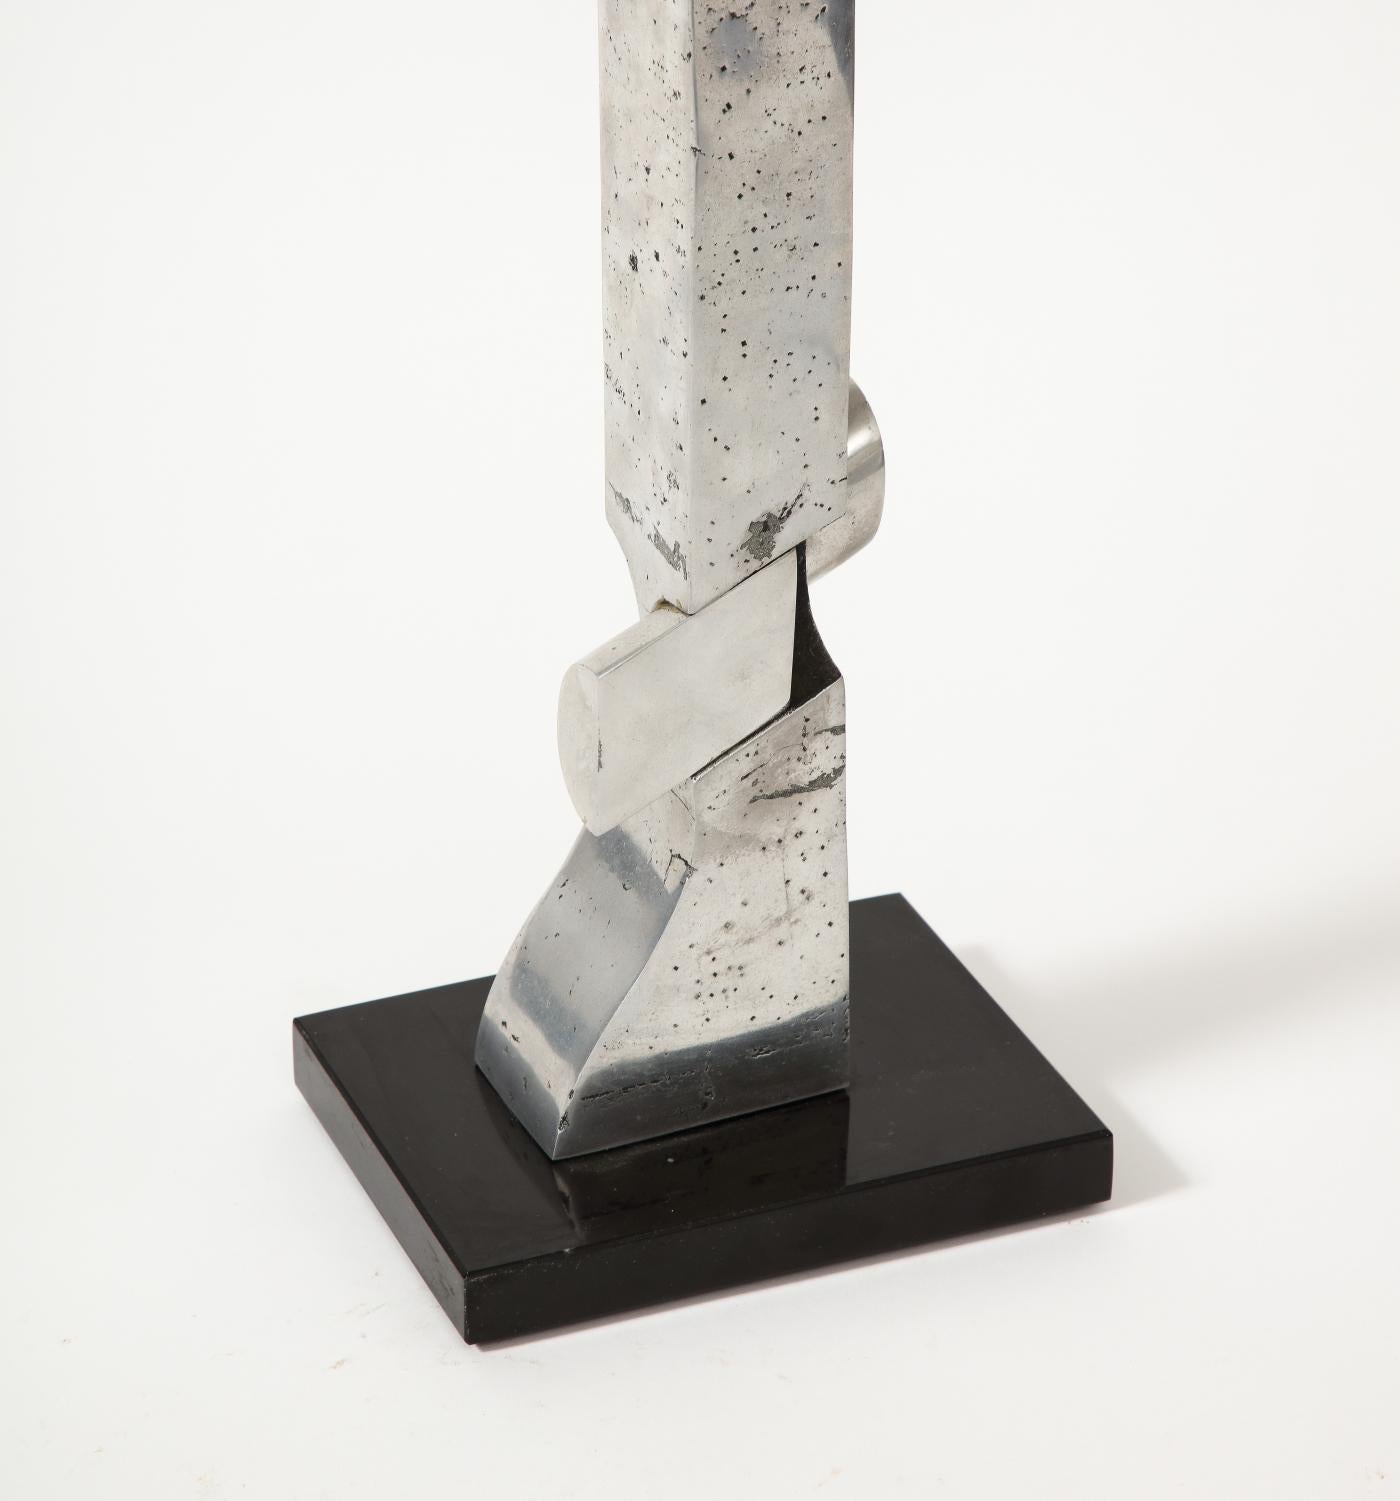 Abstract Chromed Steel Sculpture by Thibaud Weisz, c. 1950 For Sale 5